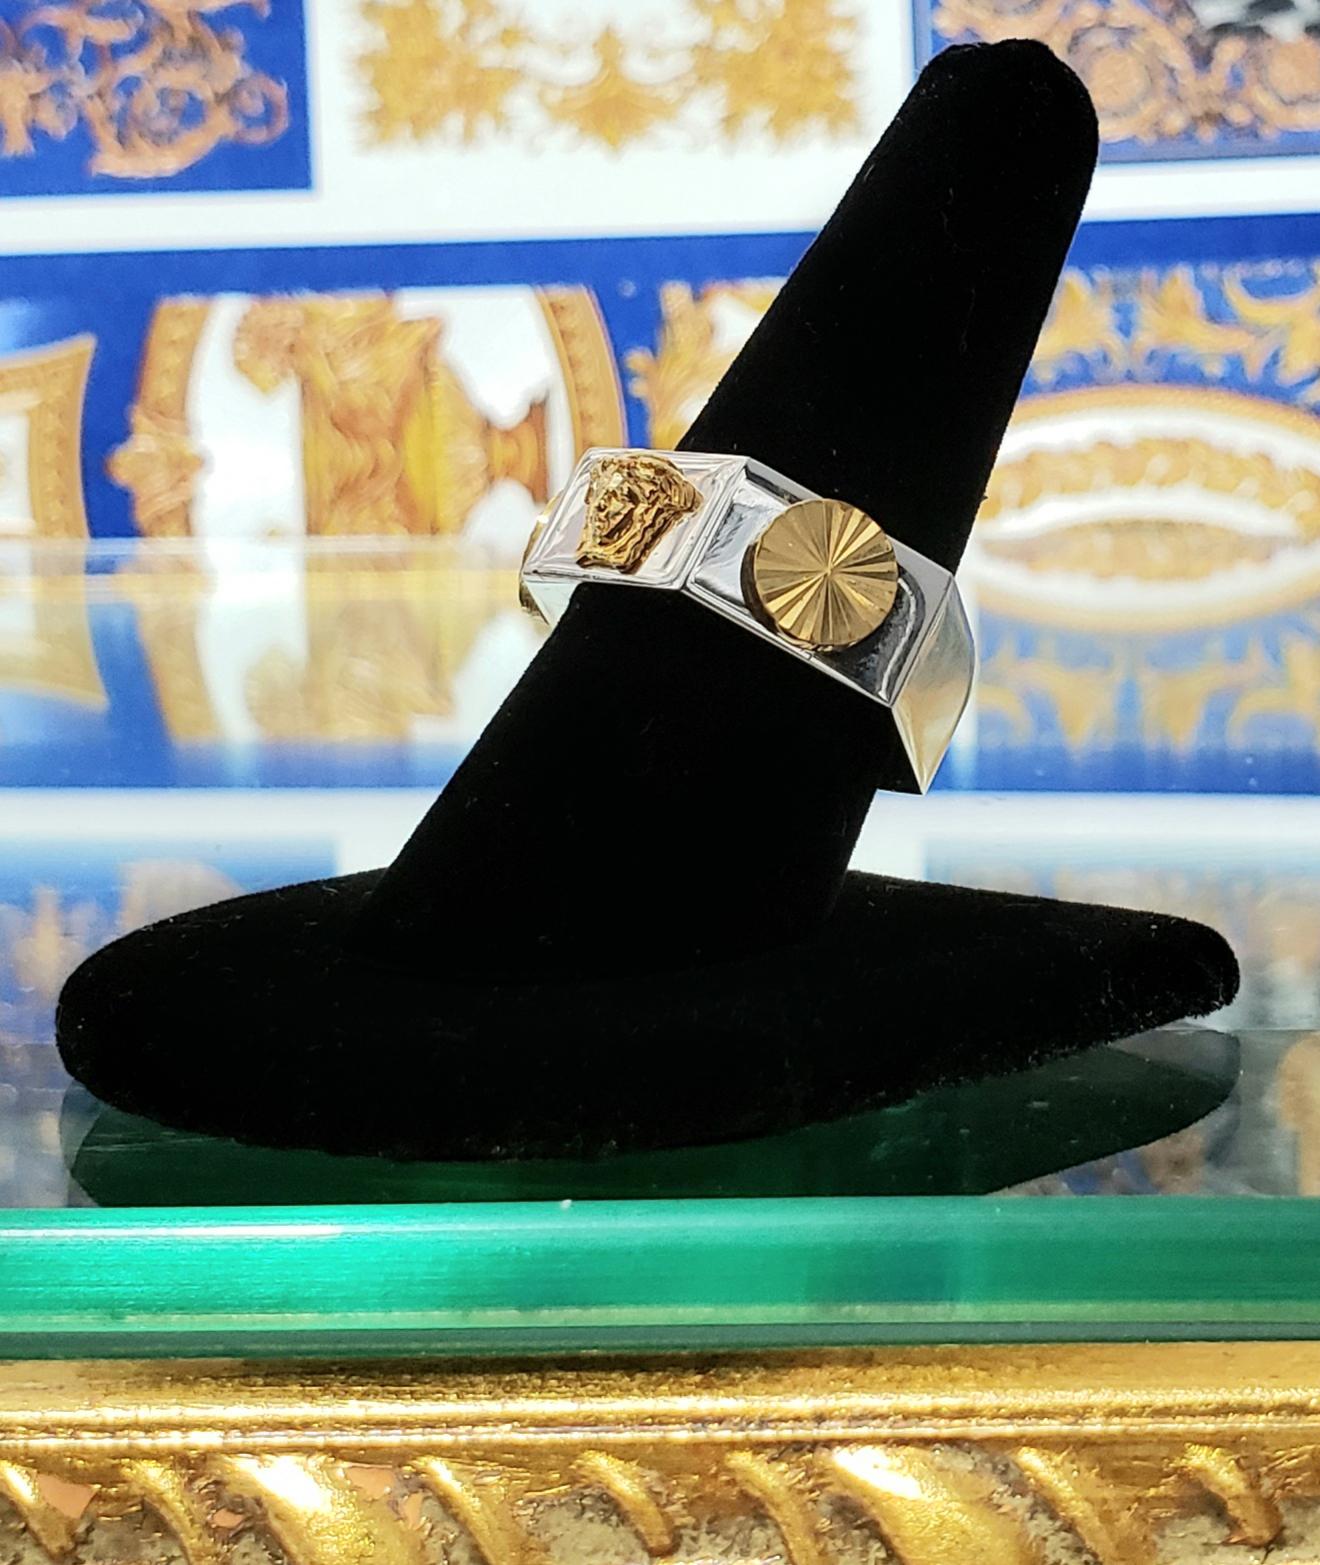 VERSACE


24K Gold Plated Medusa Ring



Accessories are key when creating a memorable look. 

Kudos to the house of Versace on this very sleek Hexagon Medusa Ring.

This is a two toned metal ring that features their signature Medusa head and